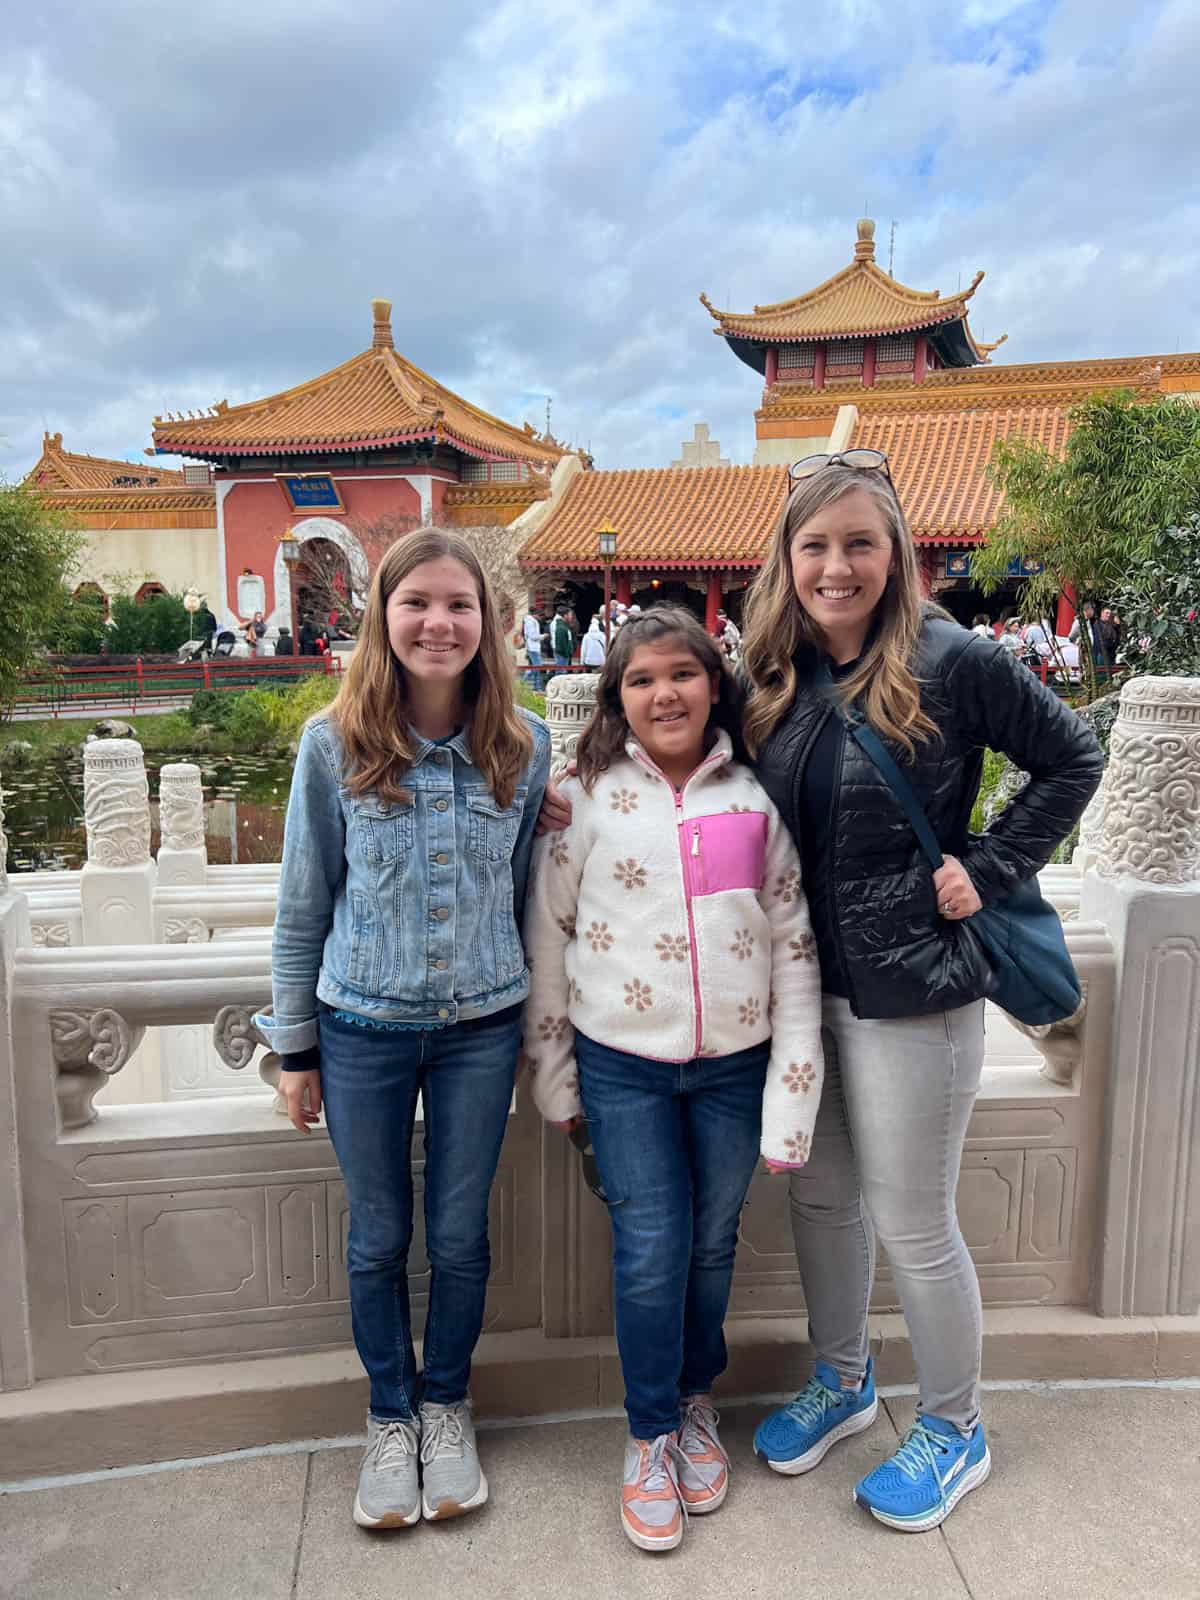 A mom and two kids in the China region at Epcot.